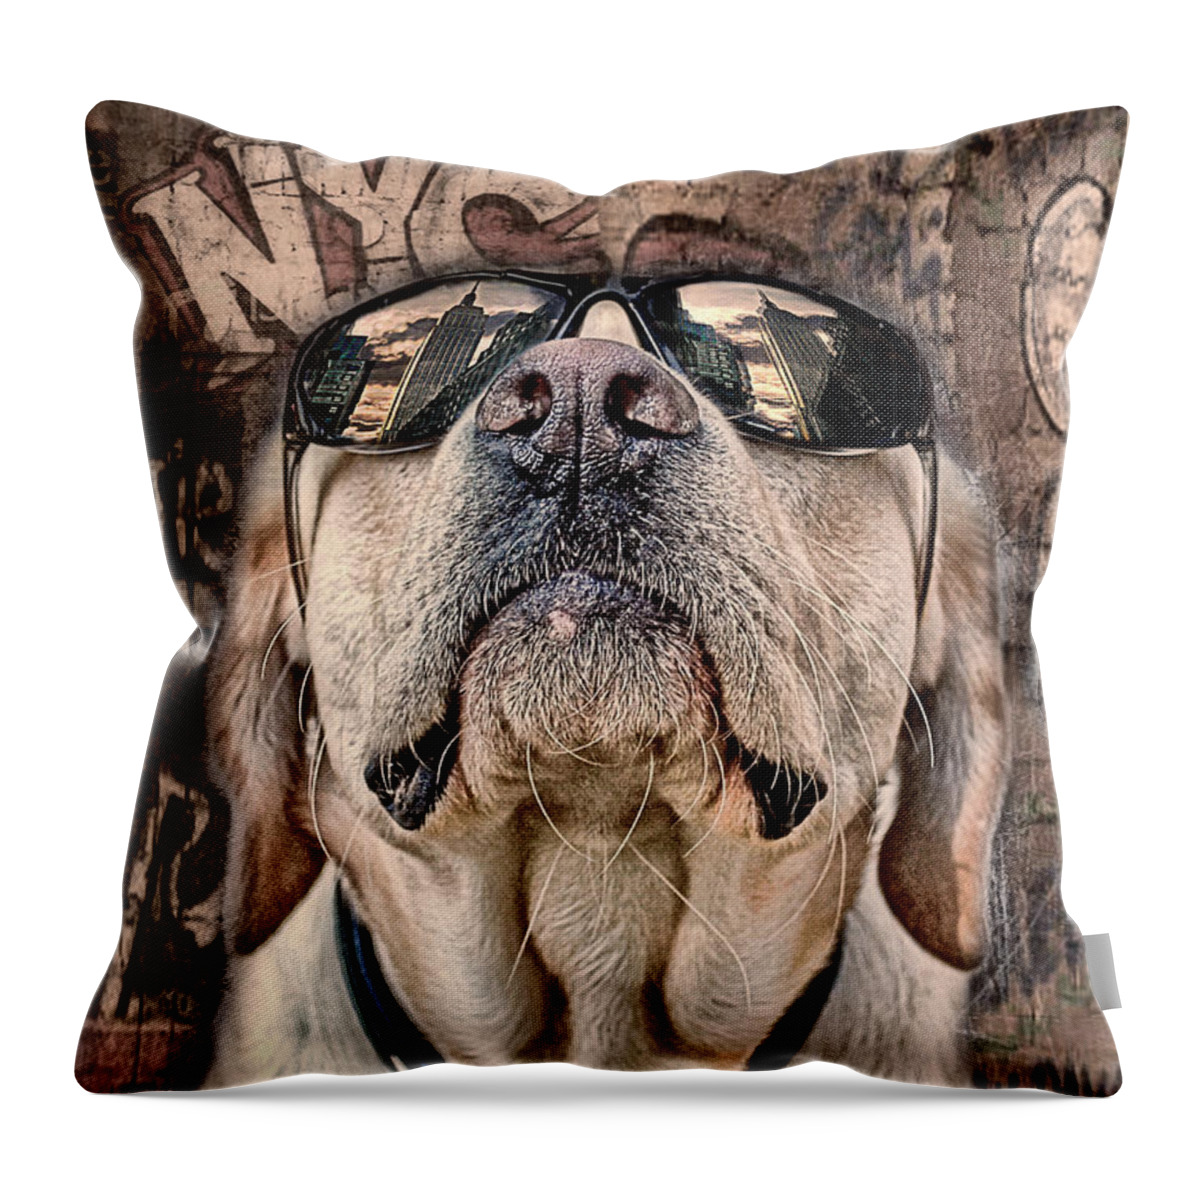 Animals Throw Pillow featuring the photograph Yeah Man . . . This Is Really High by Joachim G Pinkawa